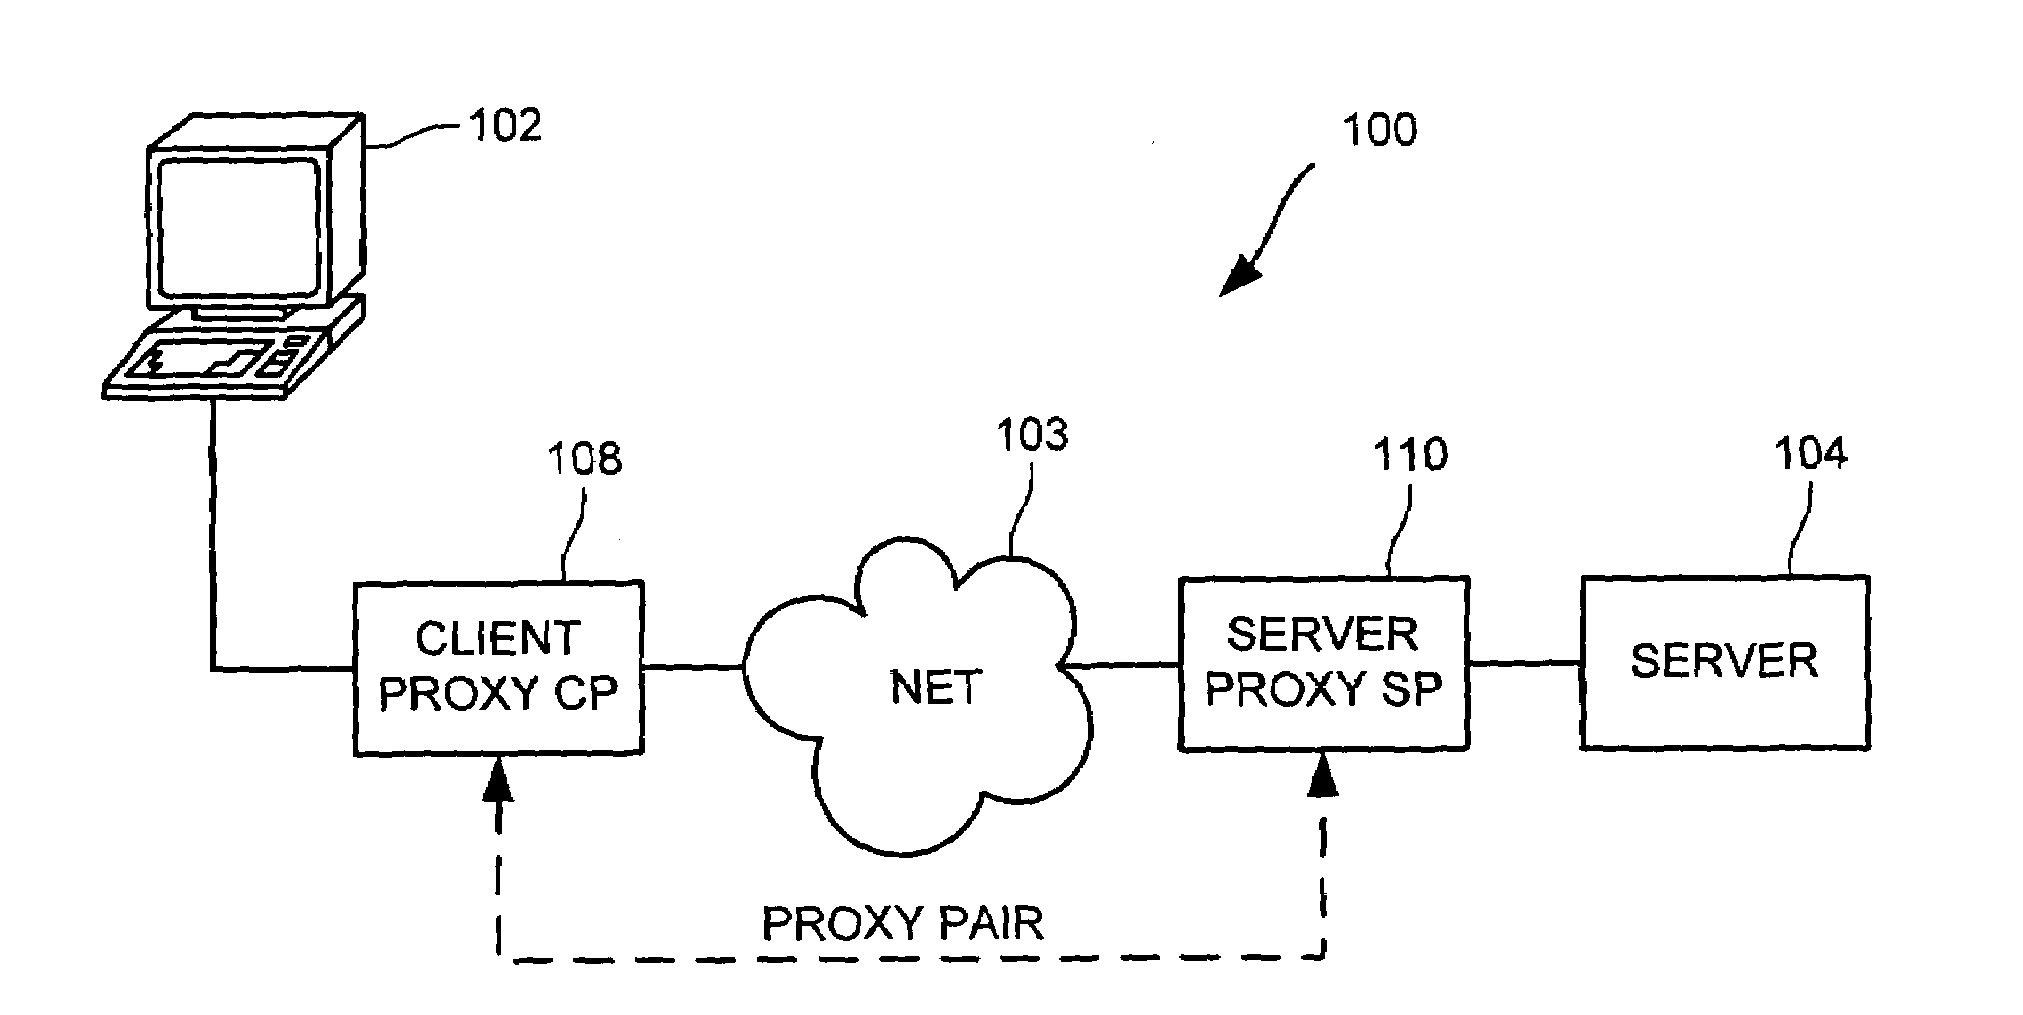 Cooperative proxy auto-discovery and connection interception